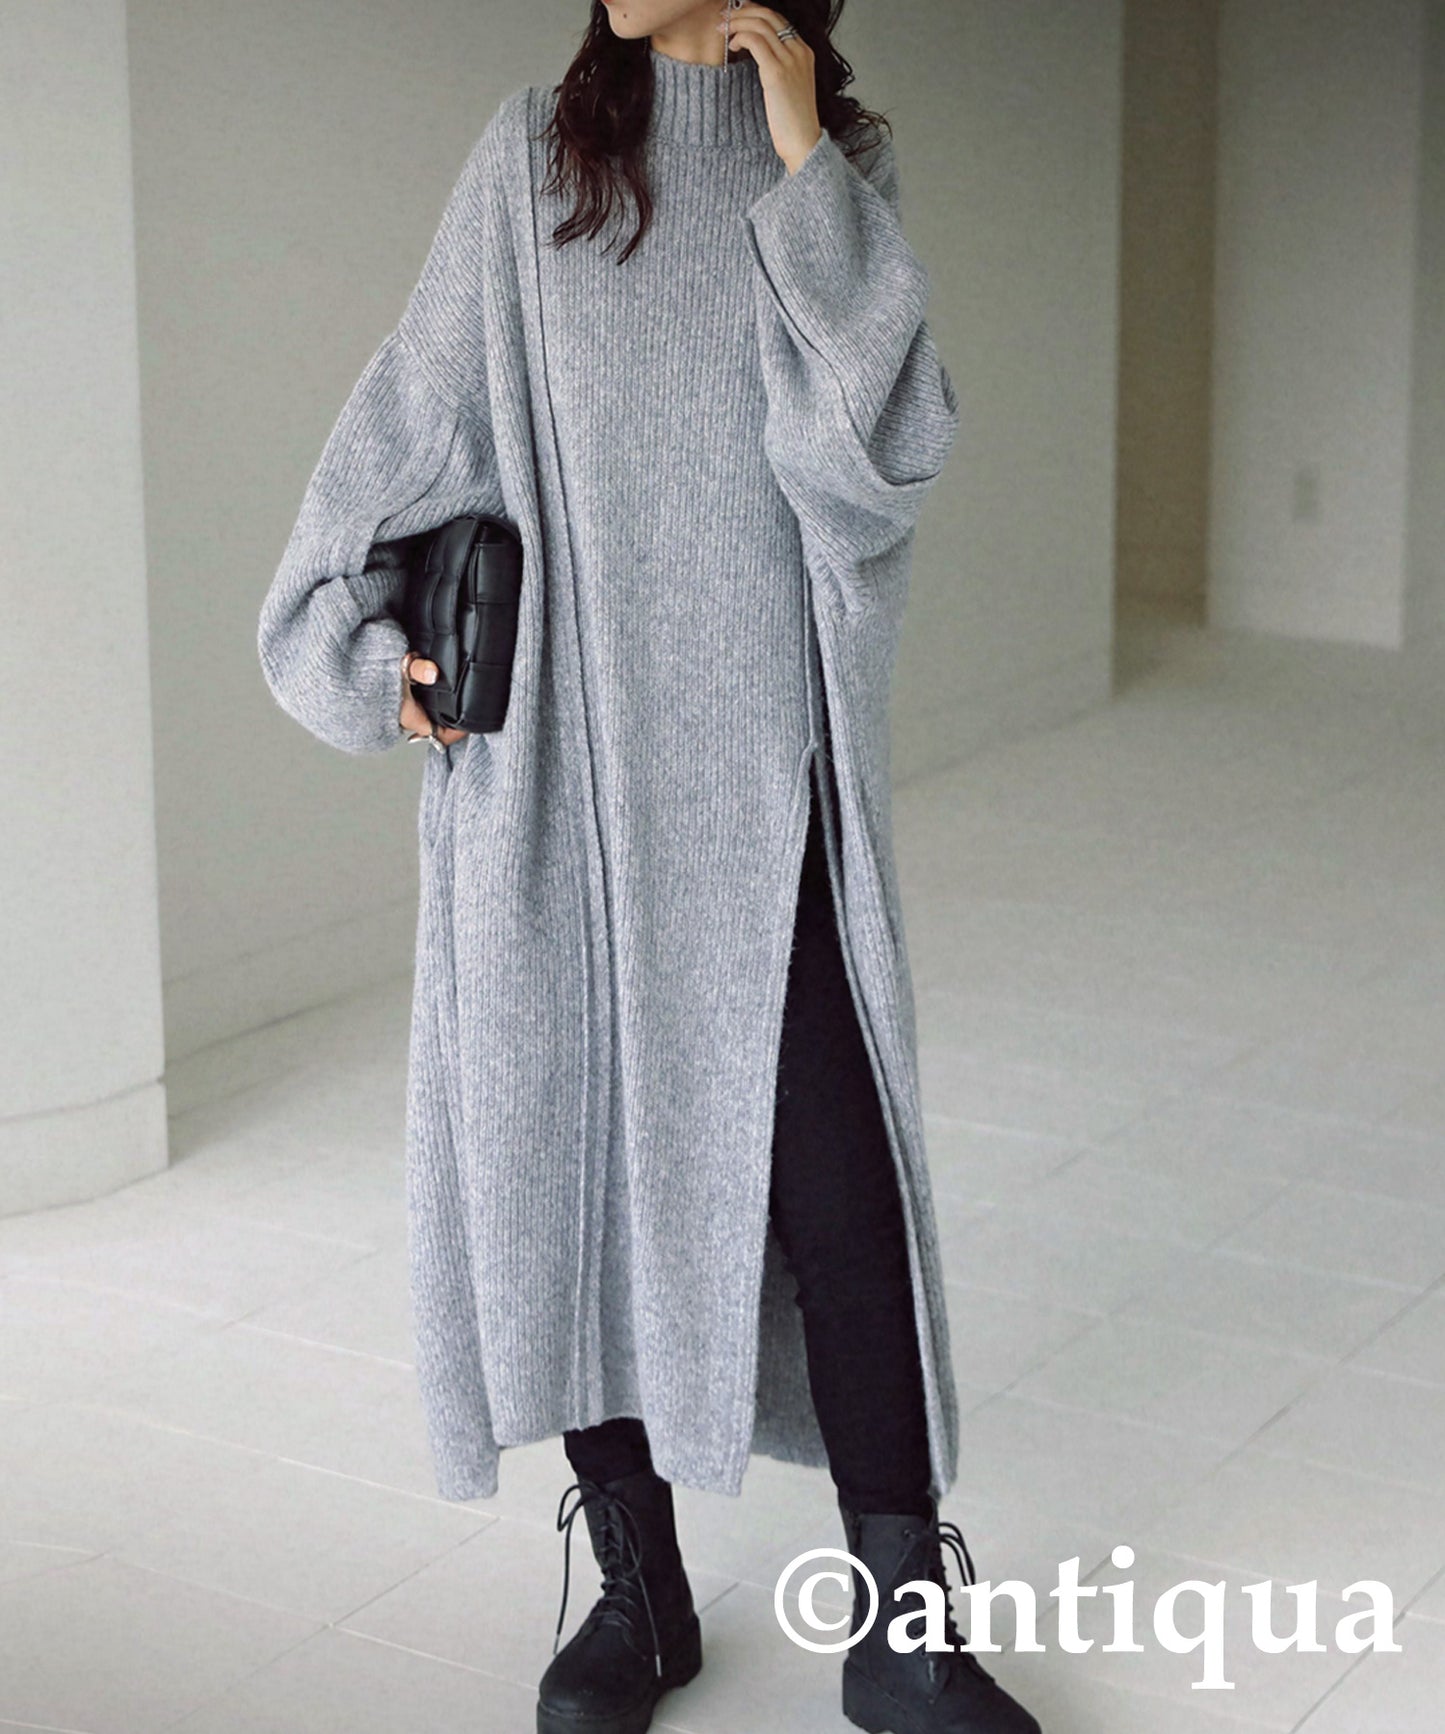 Ladies knitted casual seam detail long dress